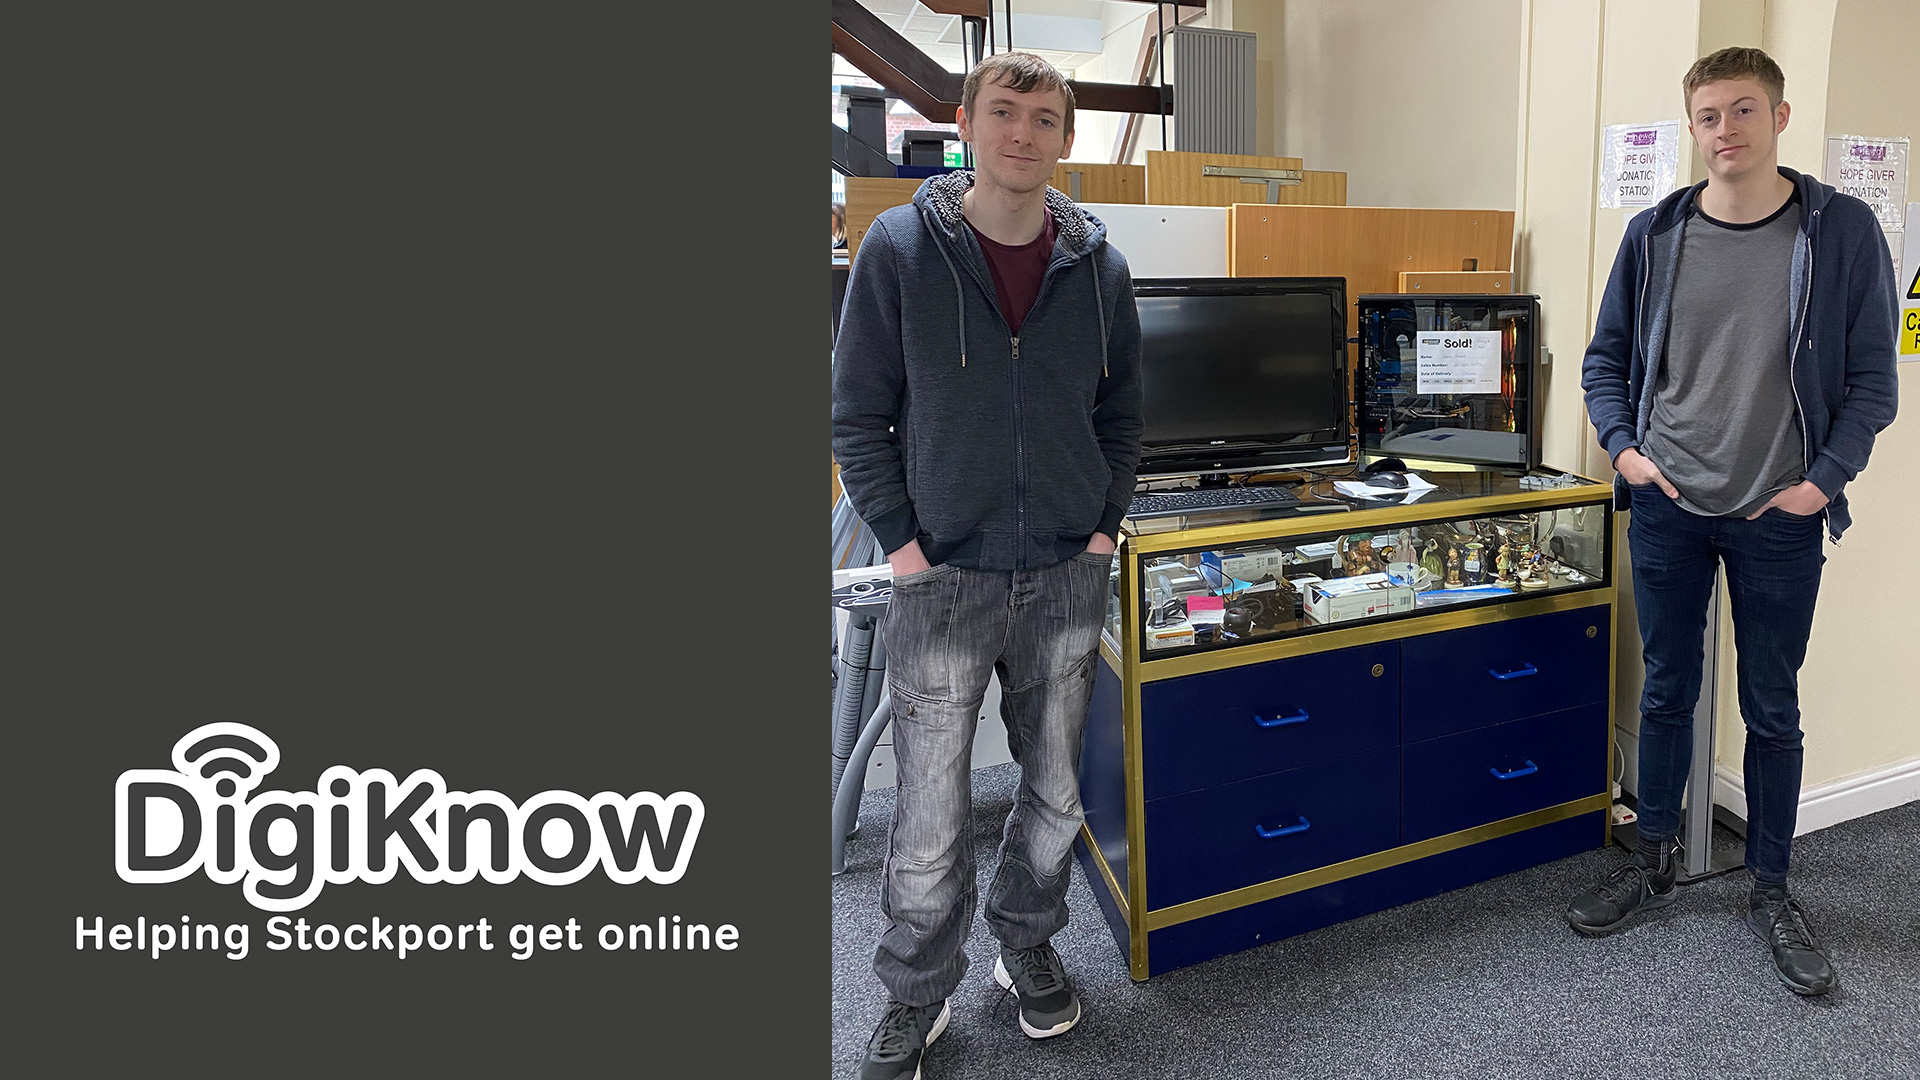 Donate spare computer equipment to help people in Stockport get online